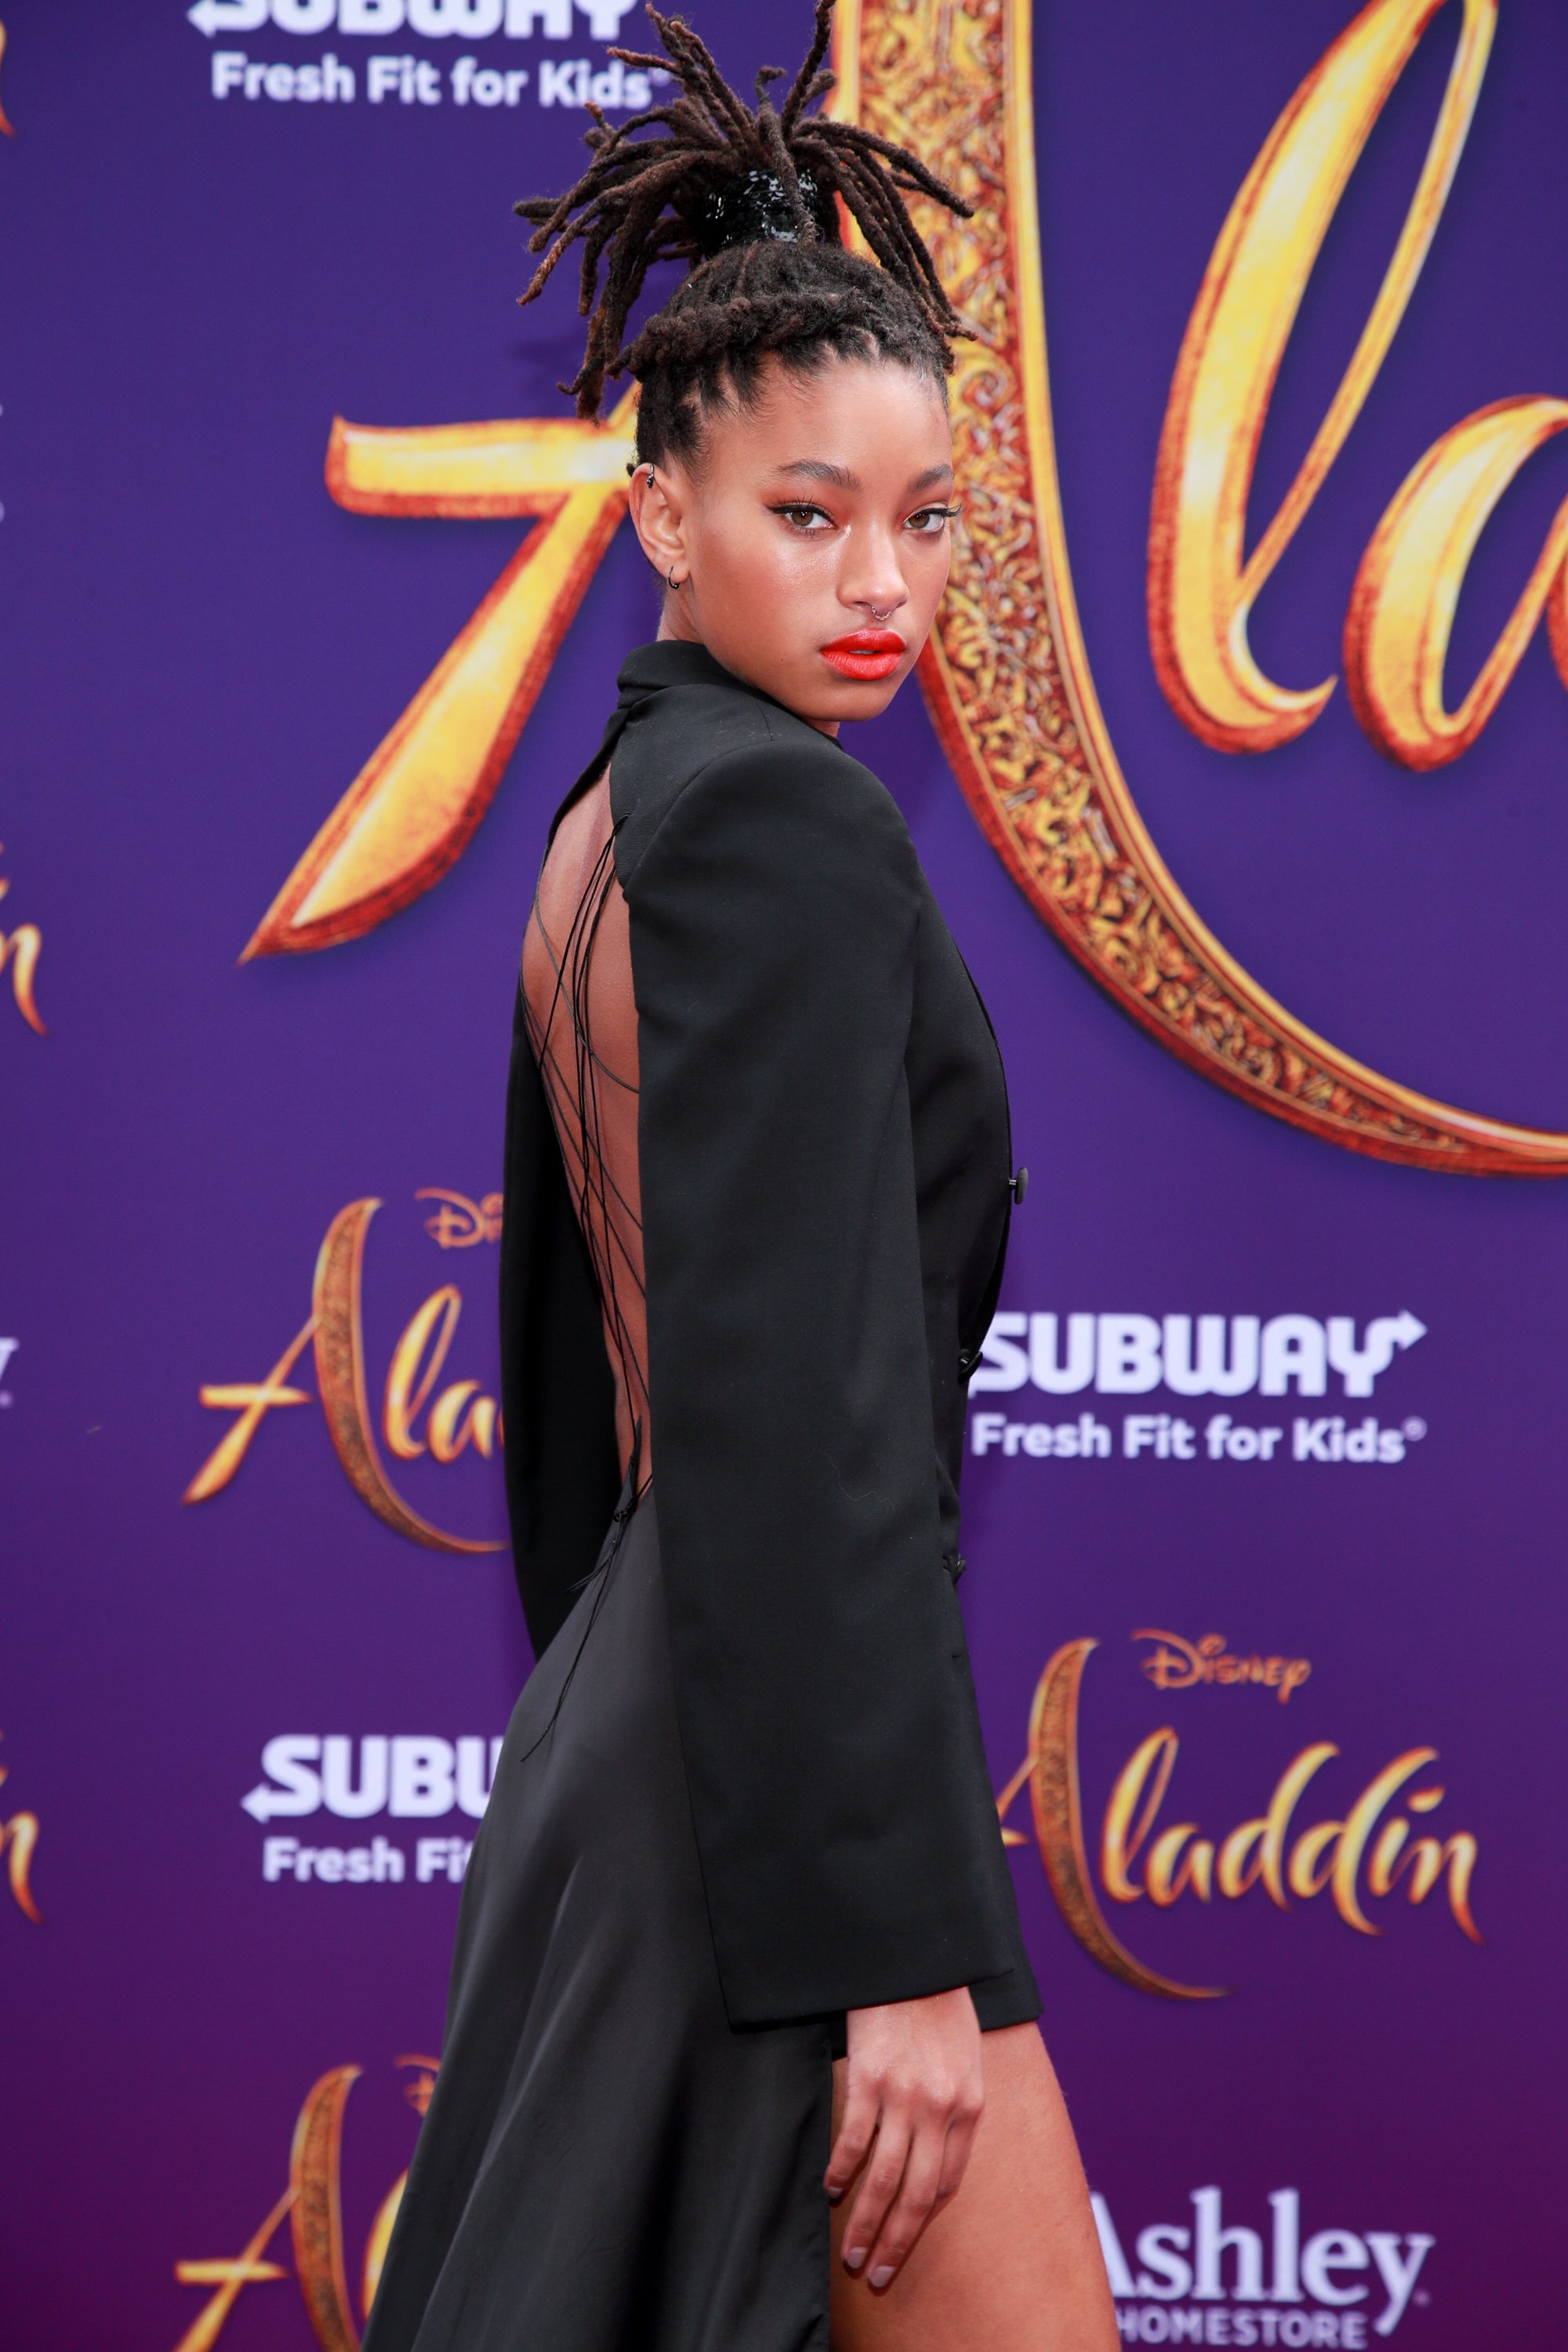 Willow Smith at the premiere of Disney's "Aladdin" on May 21, 2019 in Los Angeles, California.| Source: Getty Images